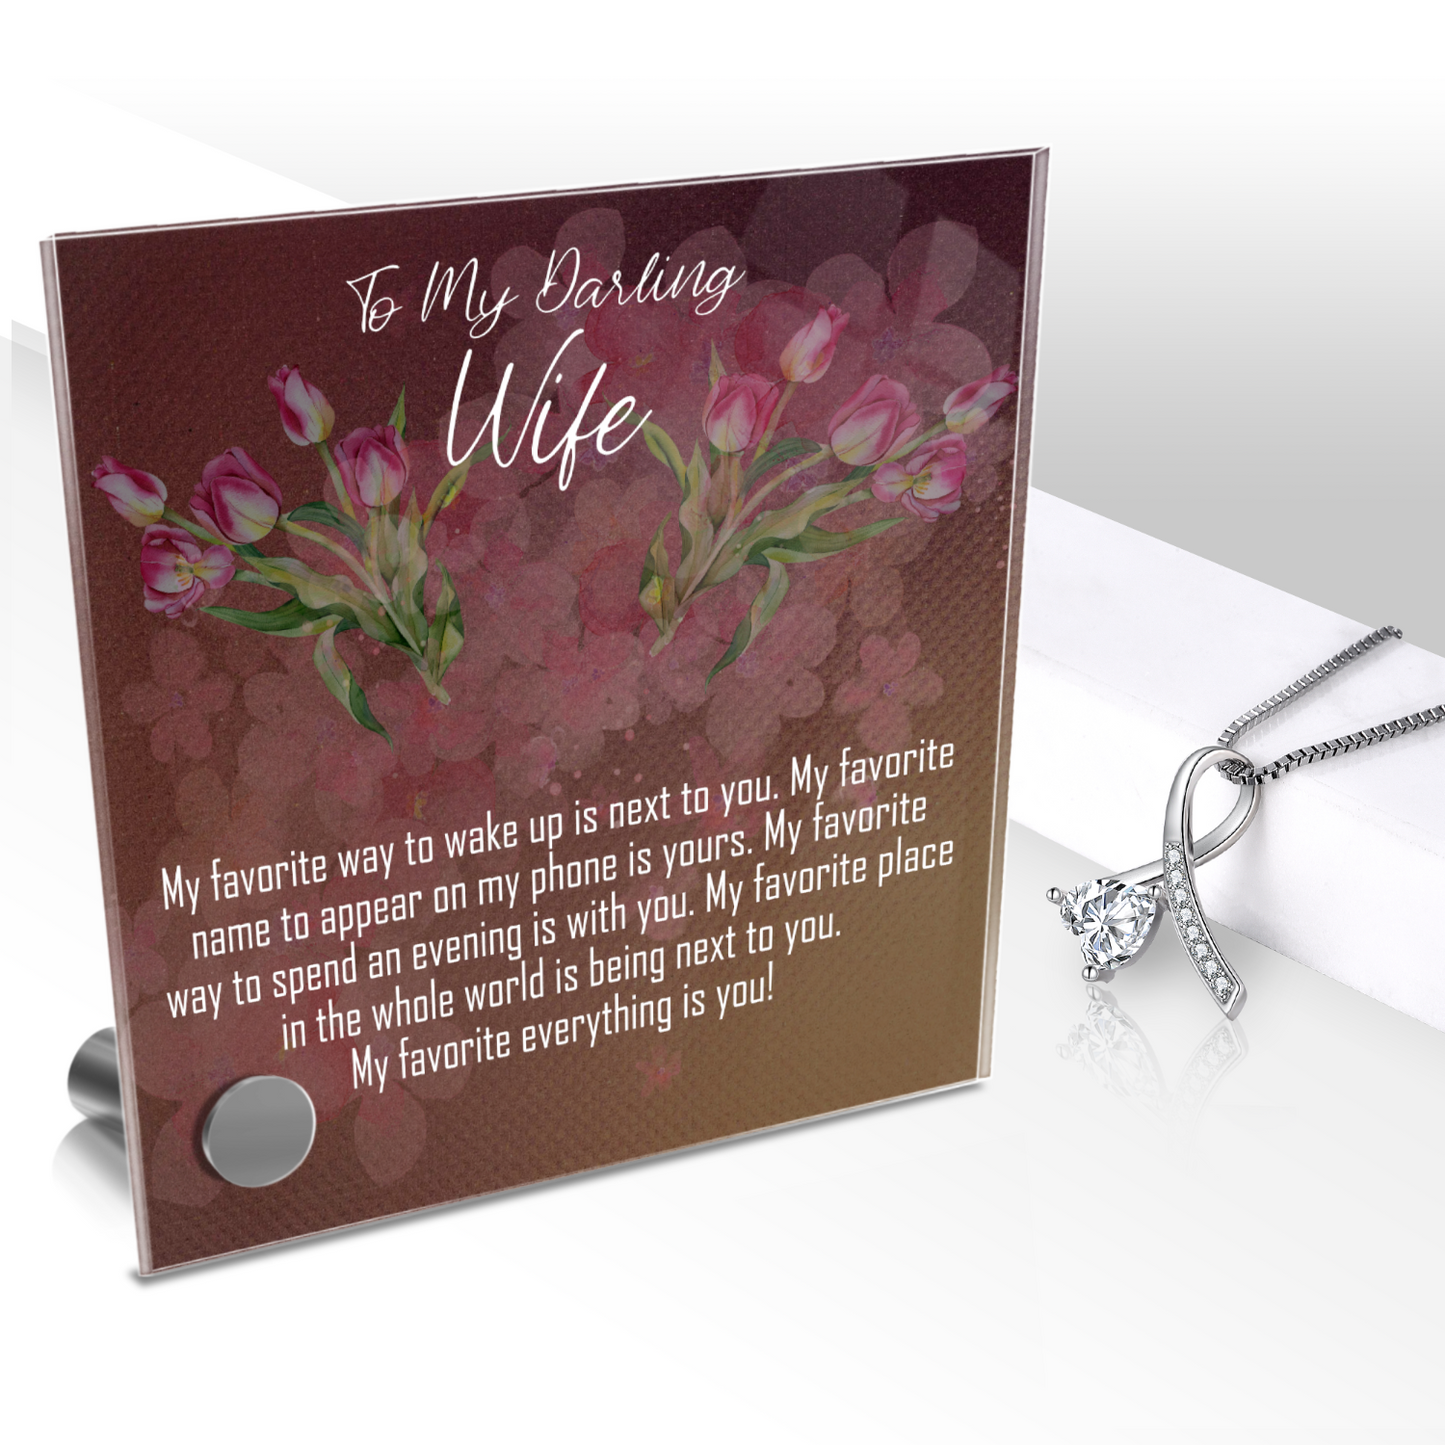 To My Darling Wife, Lumen Glass Message Card Display With Jewelry, Valentines Day Gift